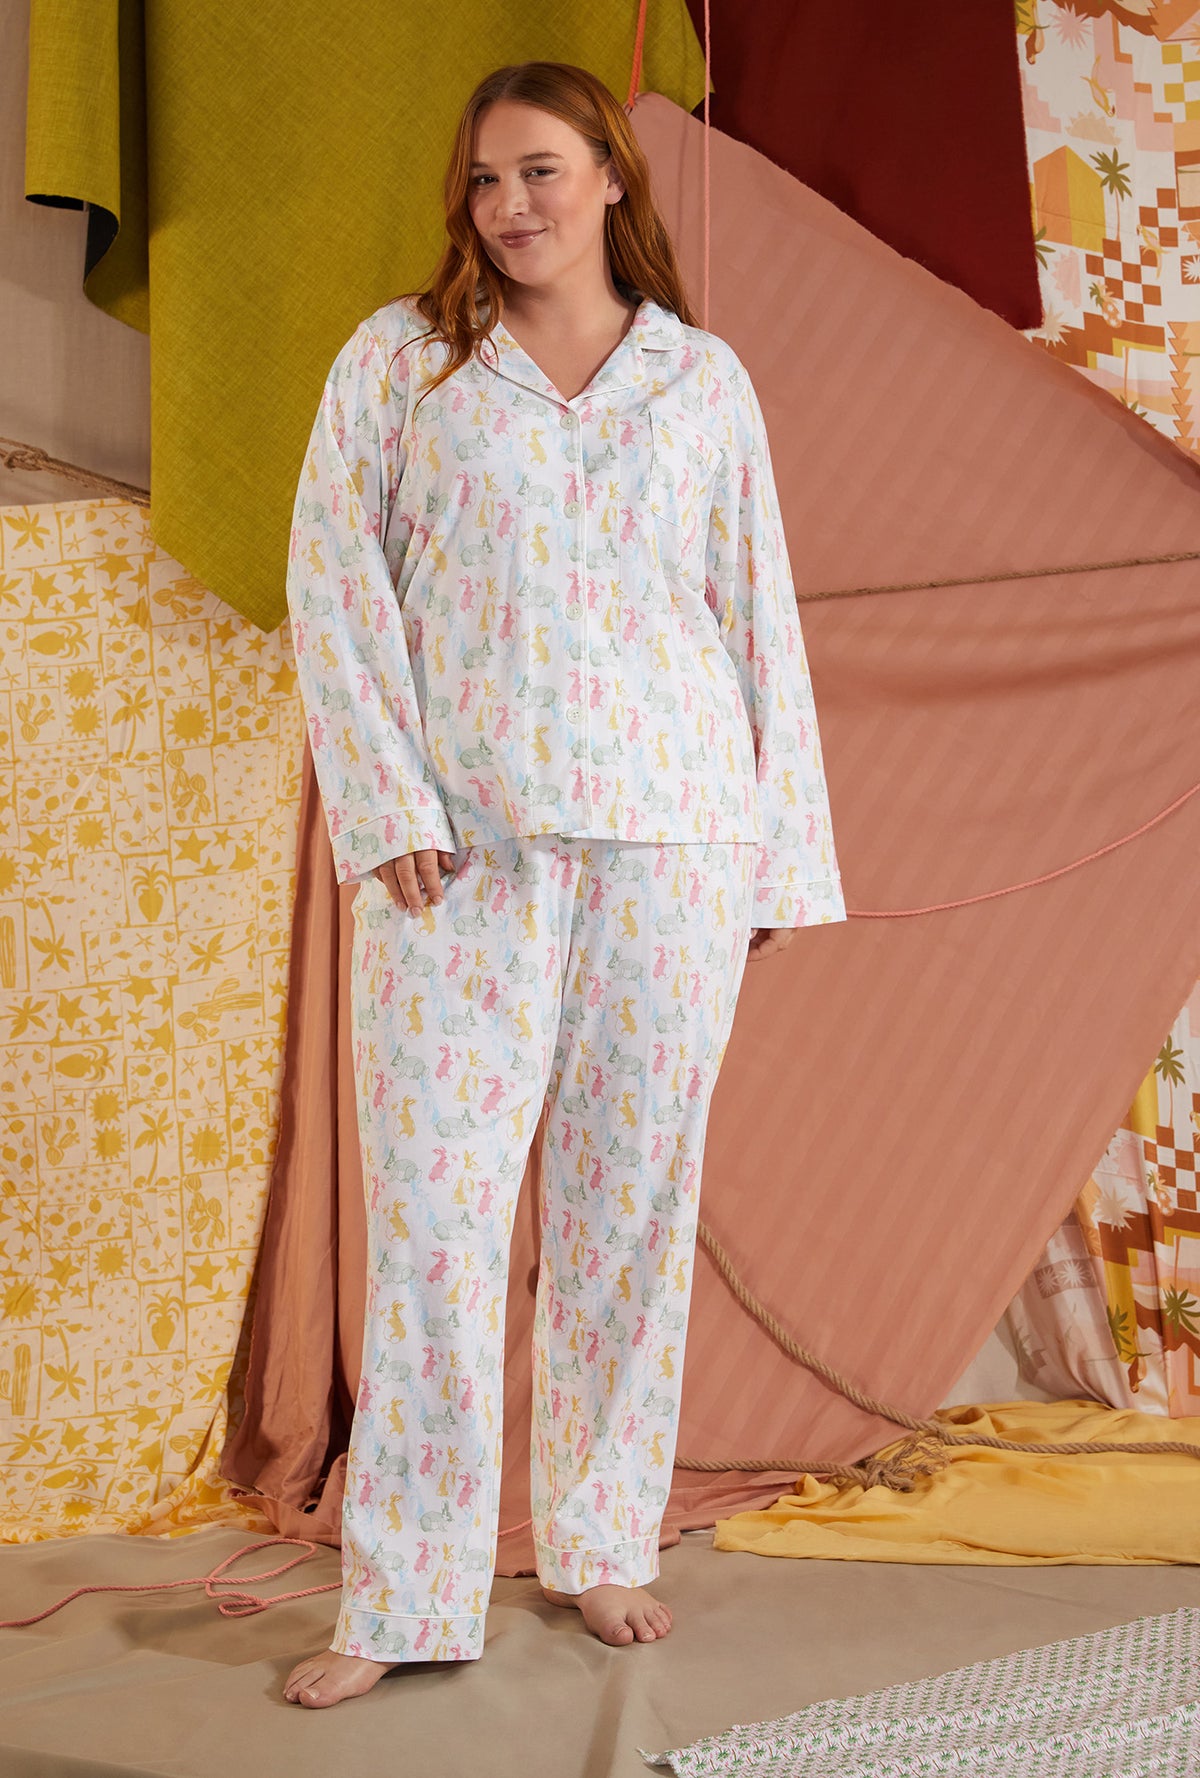 A lady wearing white long sleeve classic plus size pj set with cottontail print